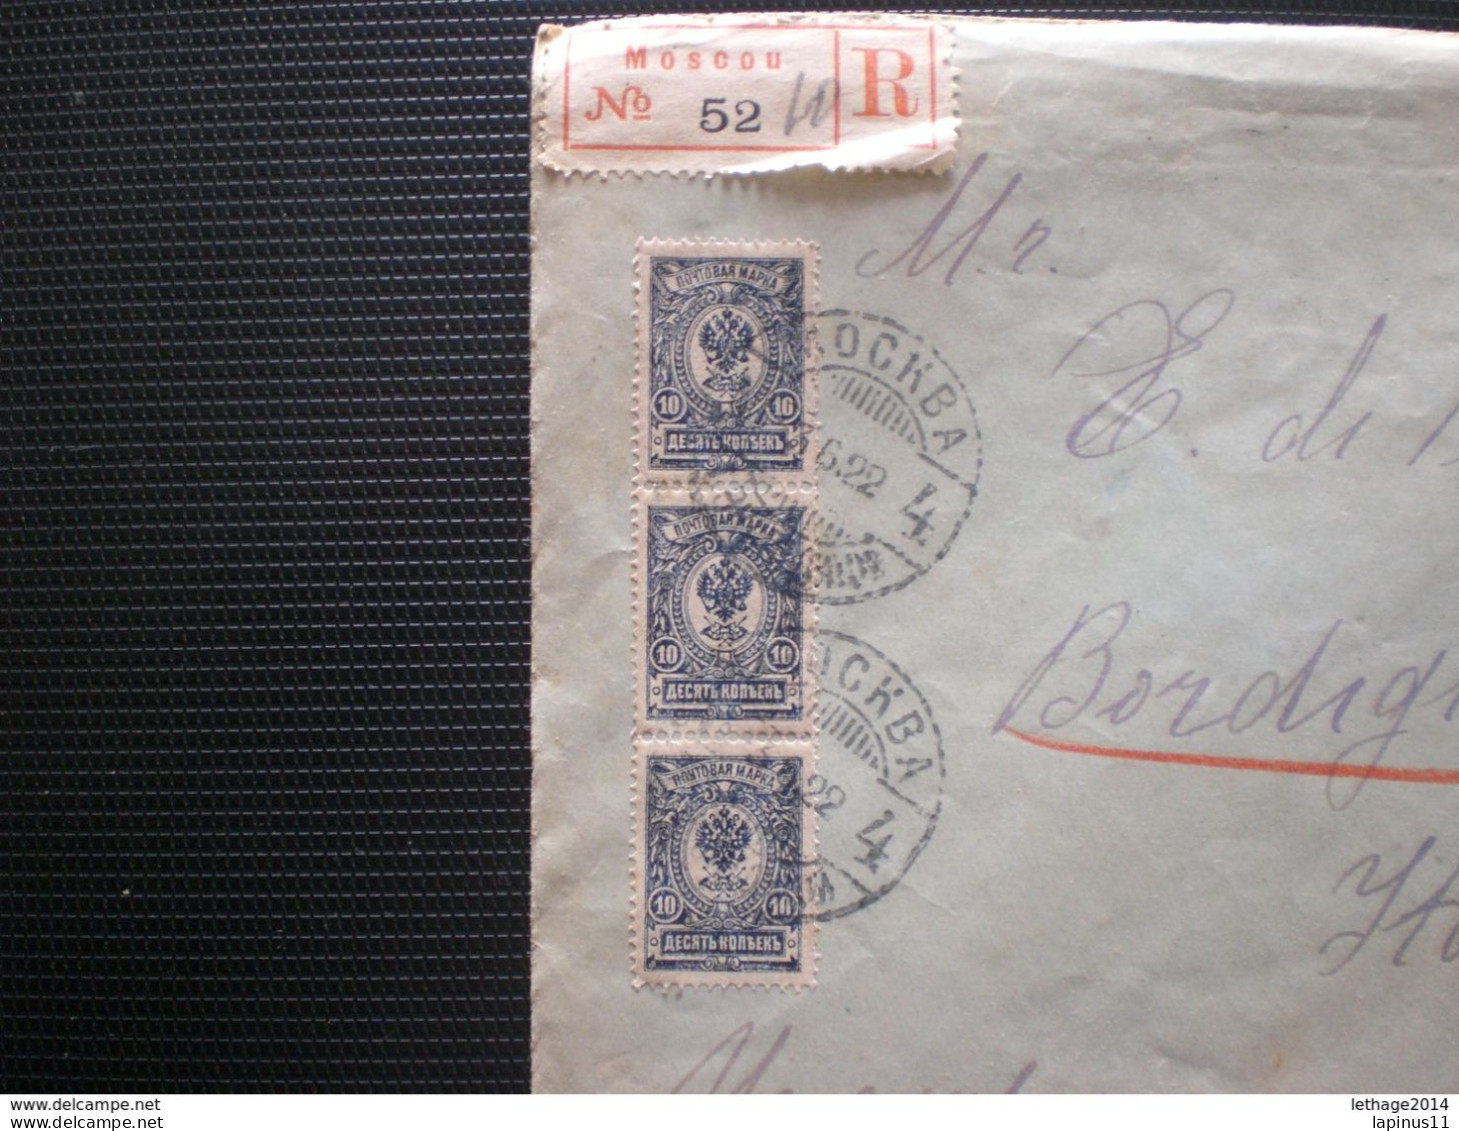 RUSSIA RUSSIE РОССИЯ STAMPS COVER 1922 REGISTER MAIL RUSSIE TO ITALY RRR RIF.TAGG. (78) - Lettres & Documents